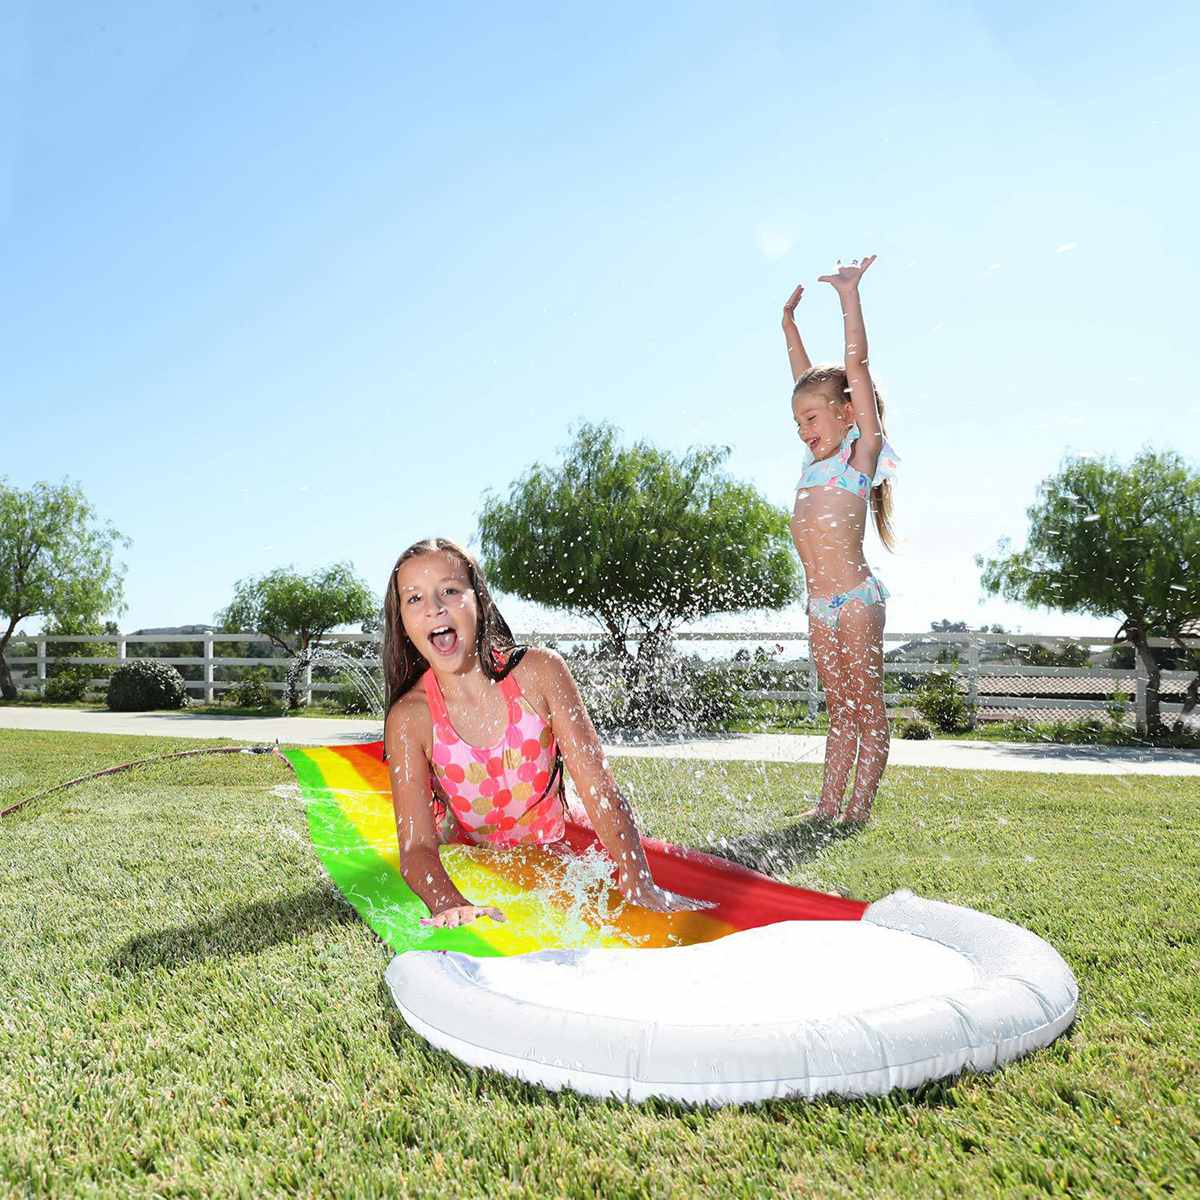 NEW Giant Surf Water Slide Fun Lawn Water Slides Pools For Kids Summer PVC Games Center Backyard Outdoor Children Adult Toys